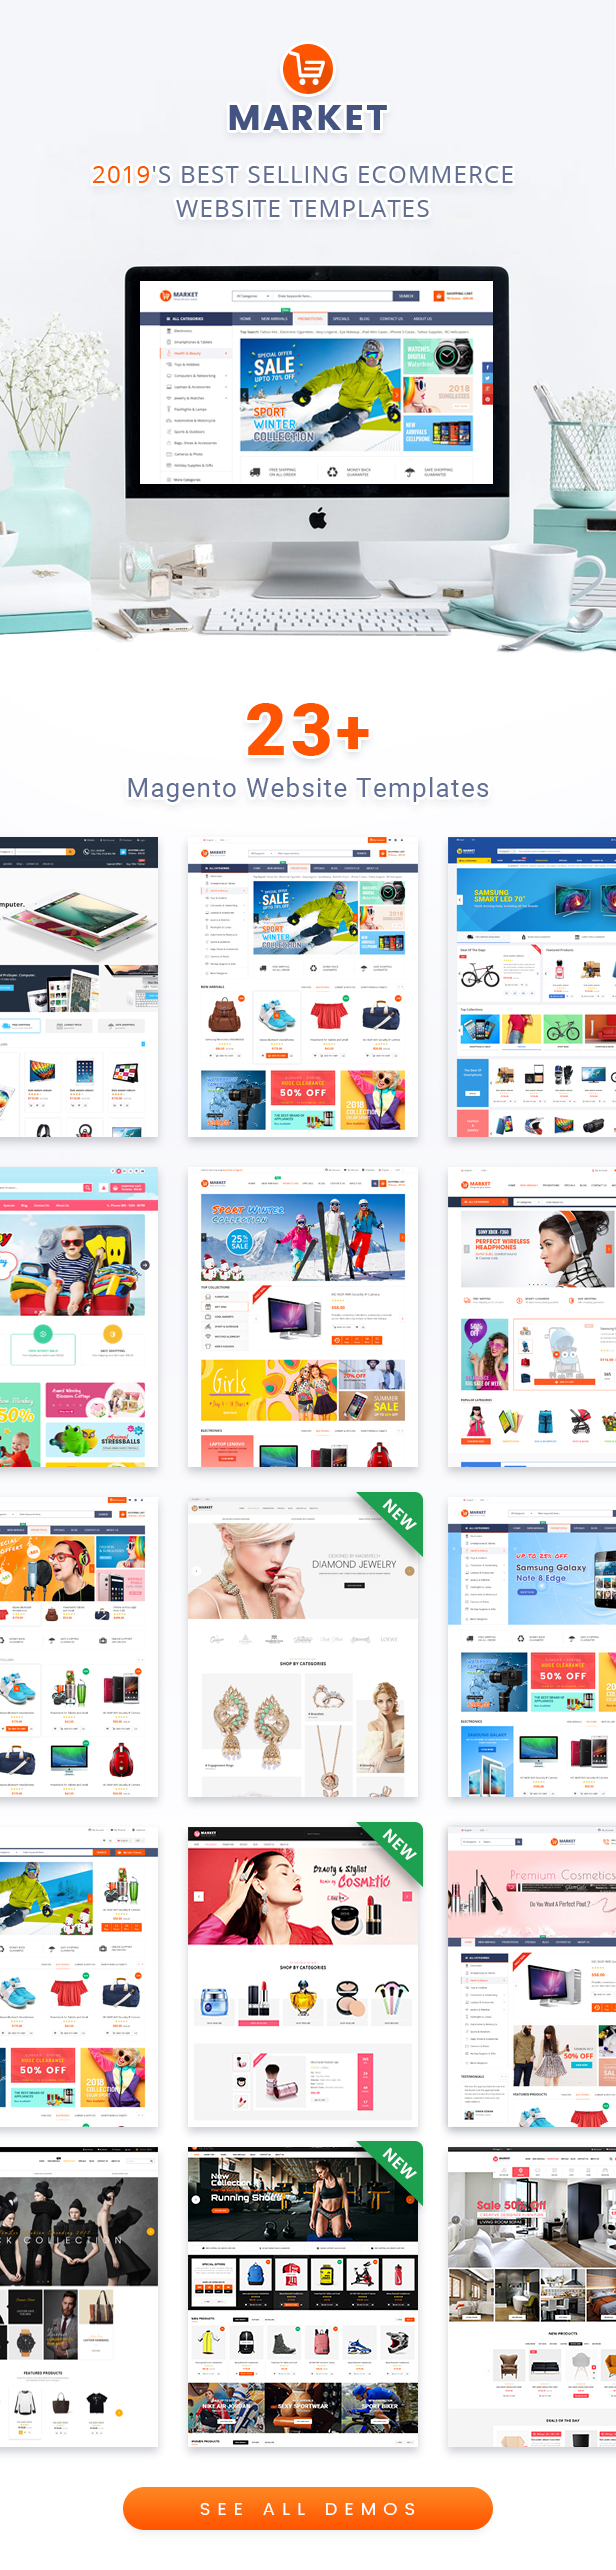 01 Intro Homepage - Market - Premium Responsive Magento 2 and 1.9 Store Theme with Mobile-Specific Layout (23 HomePages)